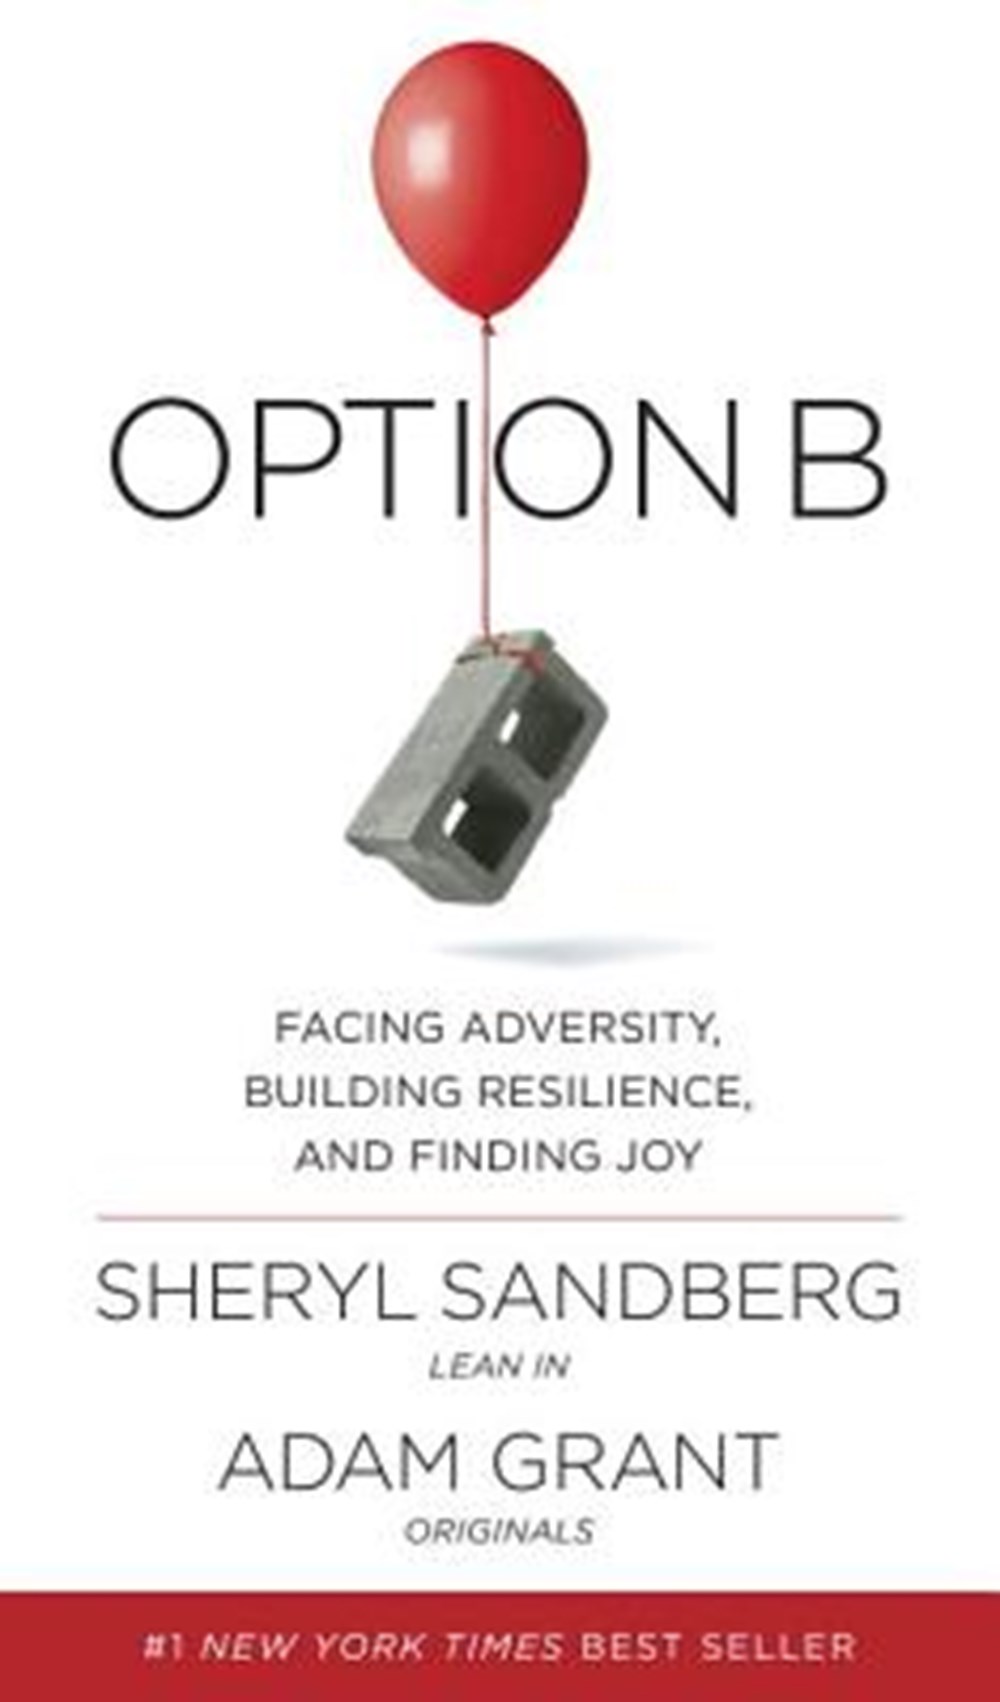 Option B Facing Adversity, Building Resilience, and Finding Joy